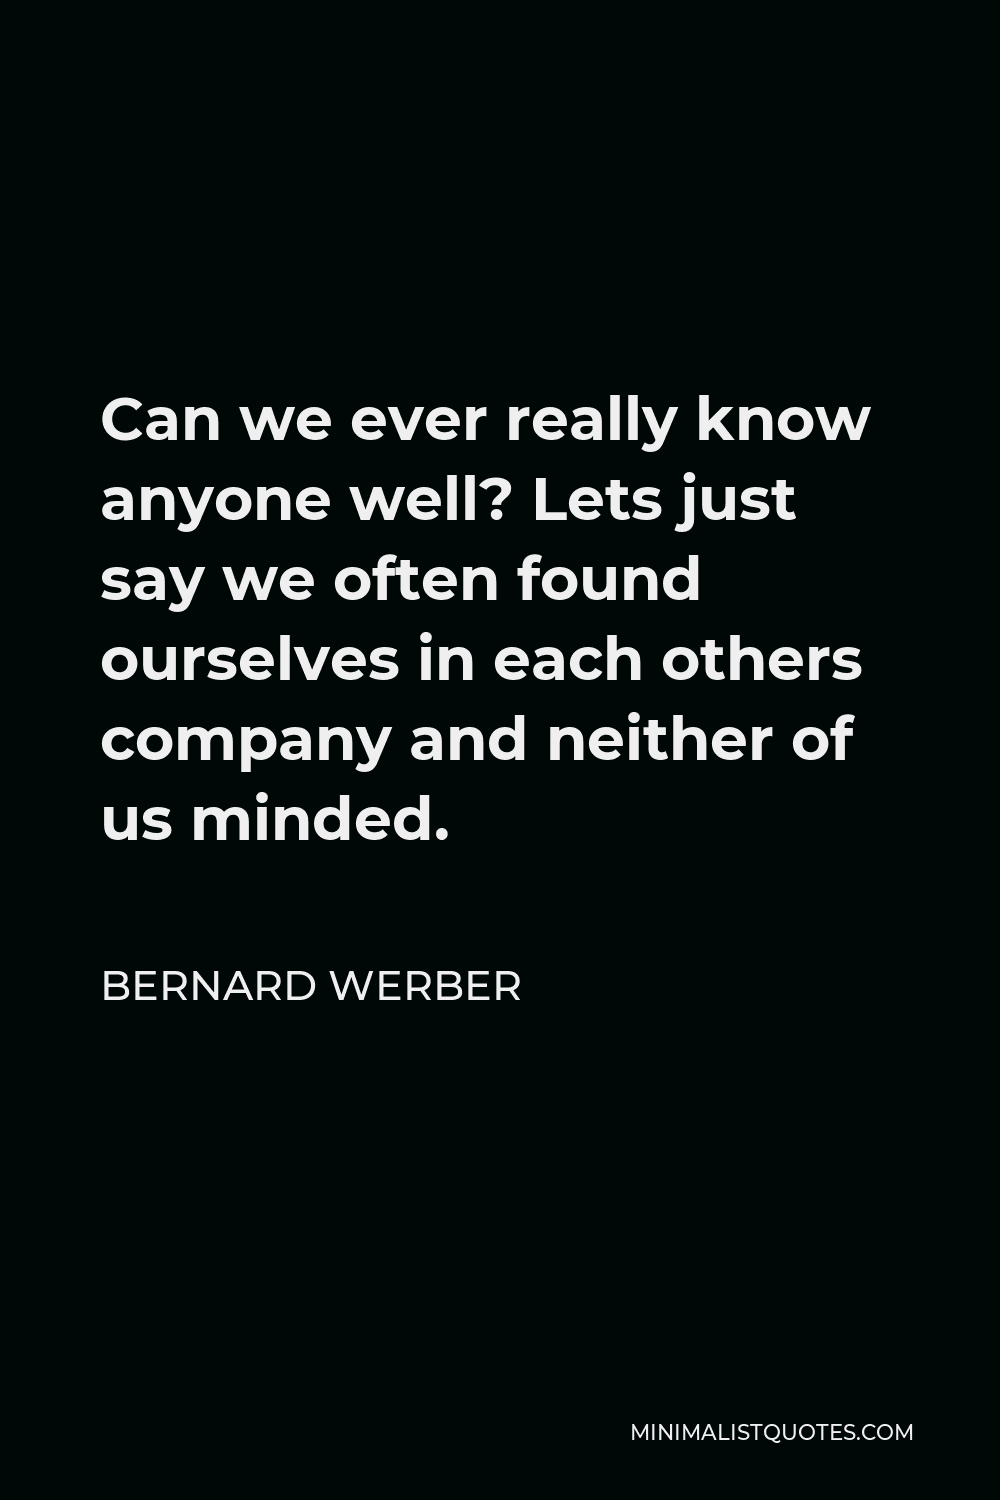 Bernard Werber Quote - Can we ever really know anyone well? Lets just say we often found ourselves in each others company and neither of us minded.